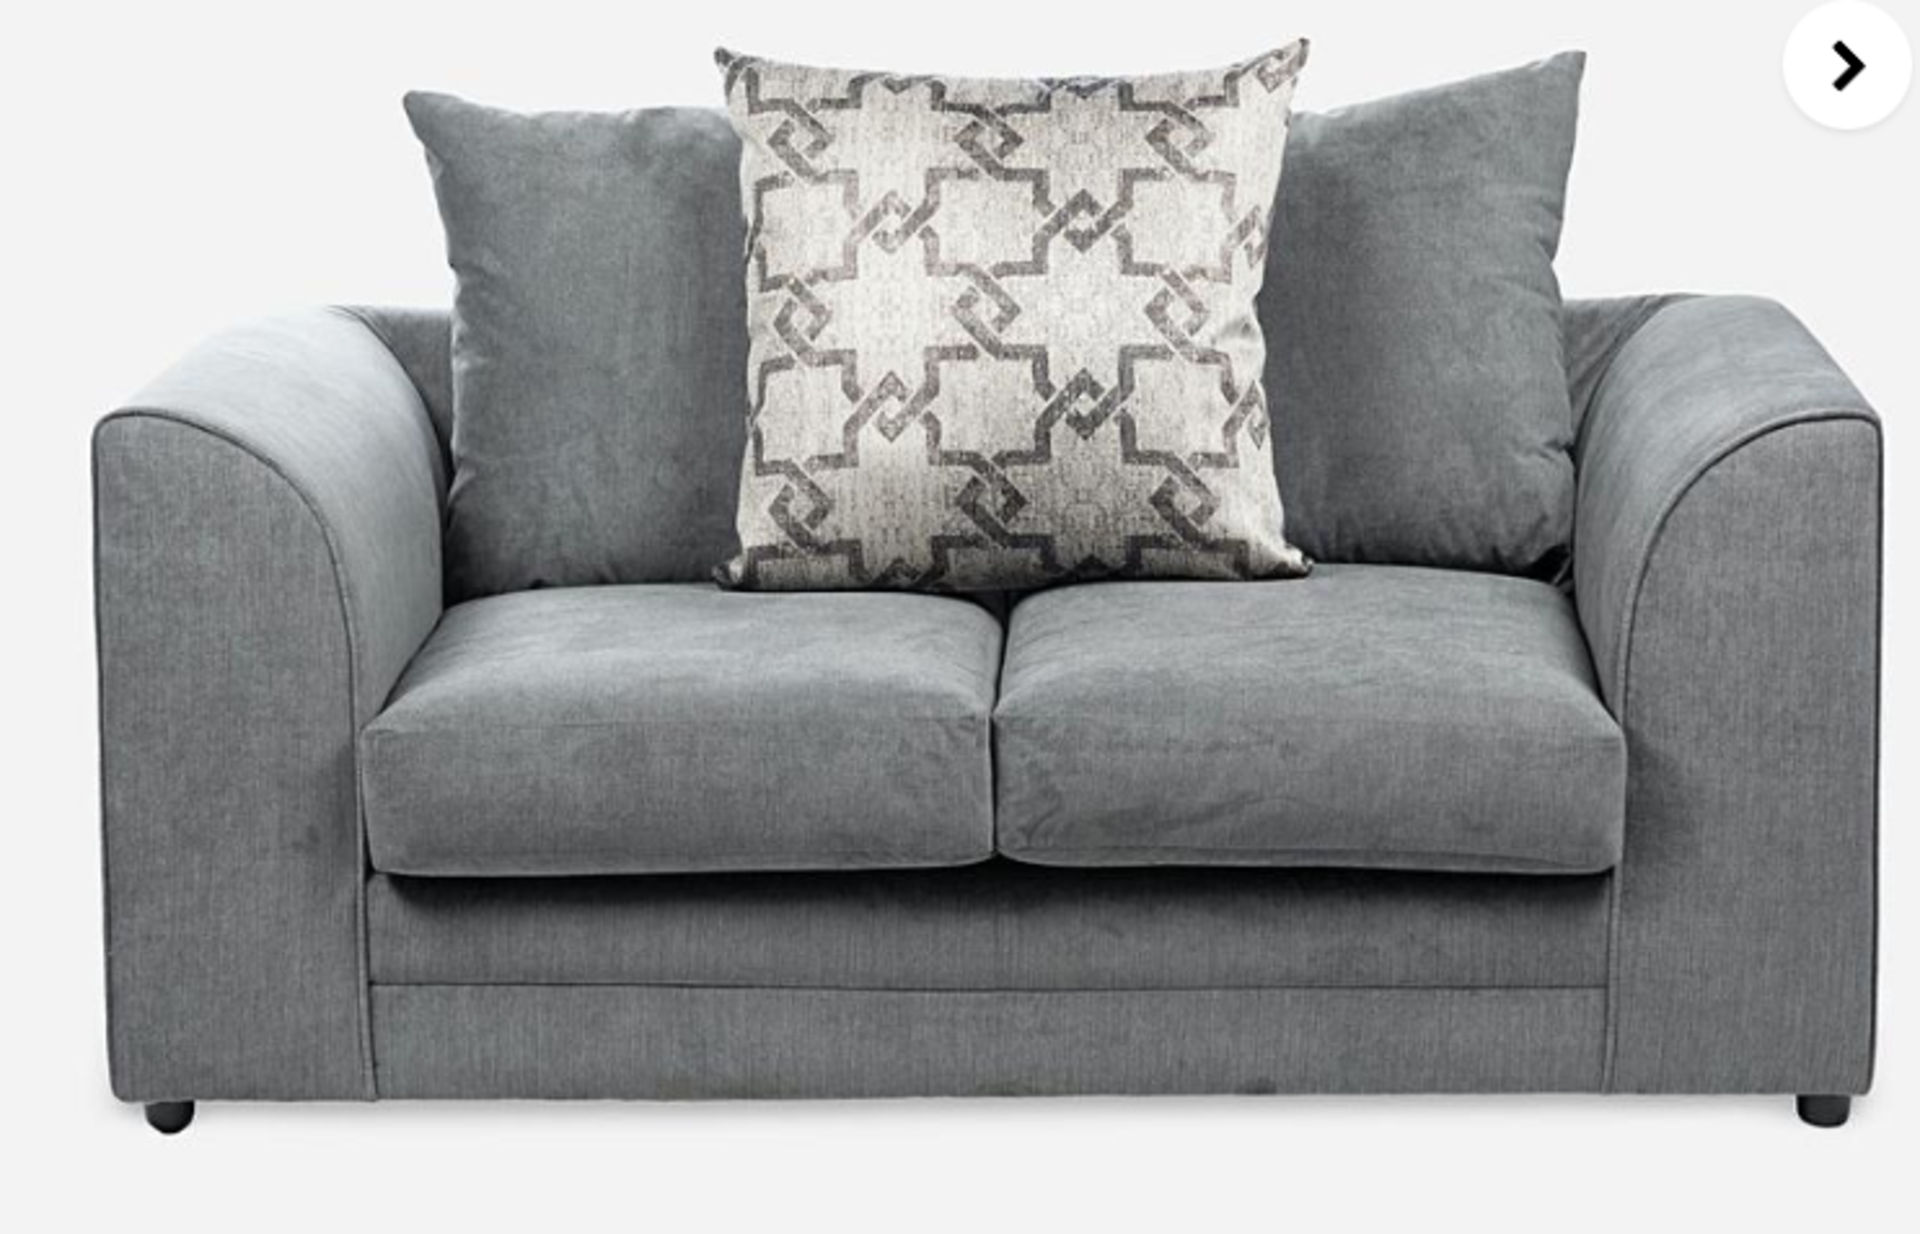 Grace 2 Seater Sofa. - SR. RRP £779.00. This Grace 2 Seater Sofa is perfect for those after a